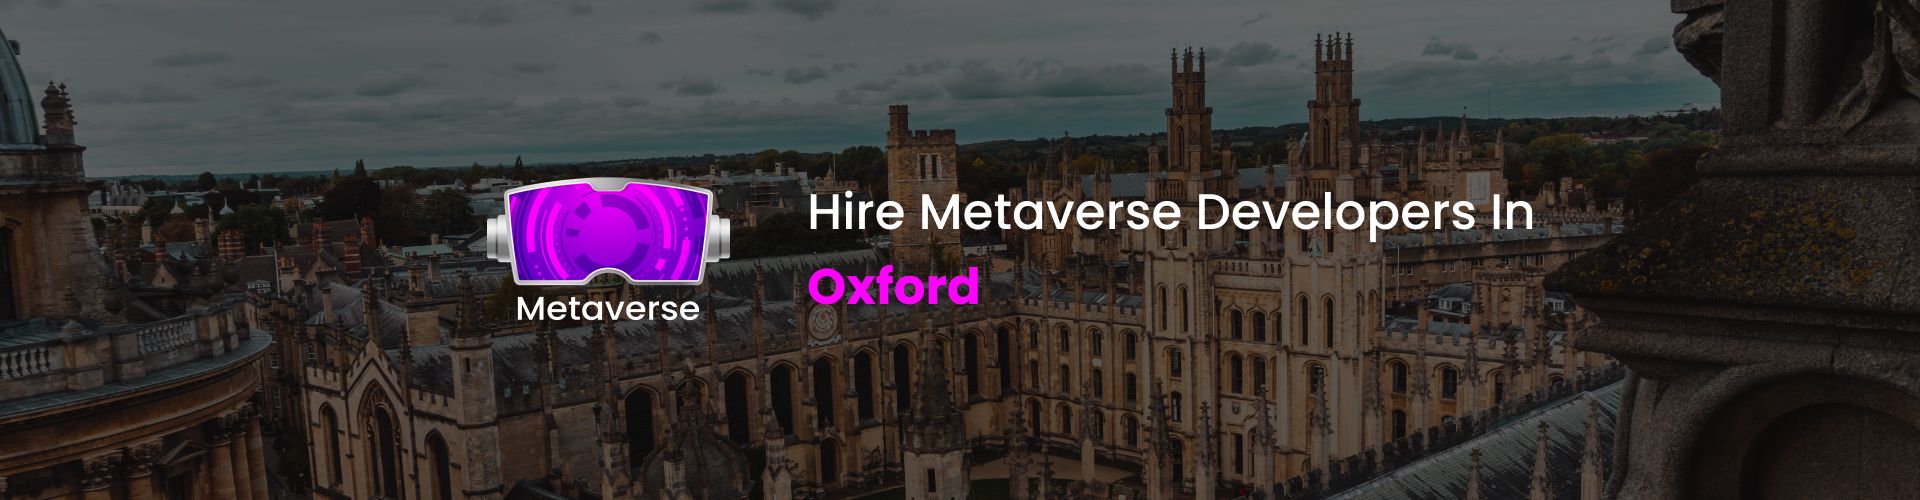 hire metaverse developers in oxford